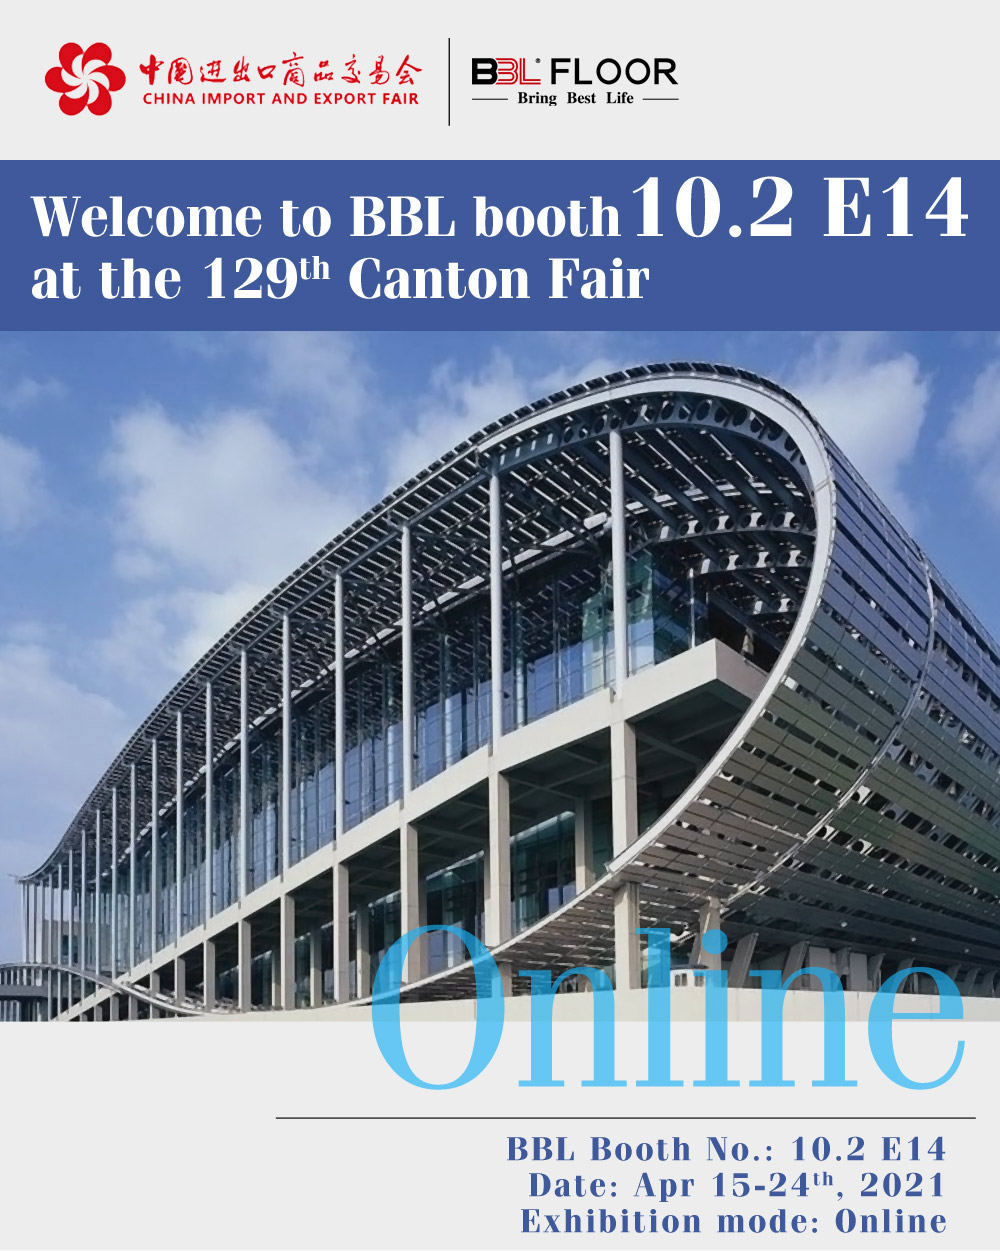 Welcome to BBL Booth 10.2E14 at the 129th Canton Fair